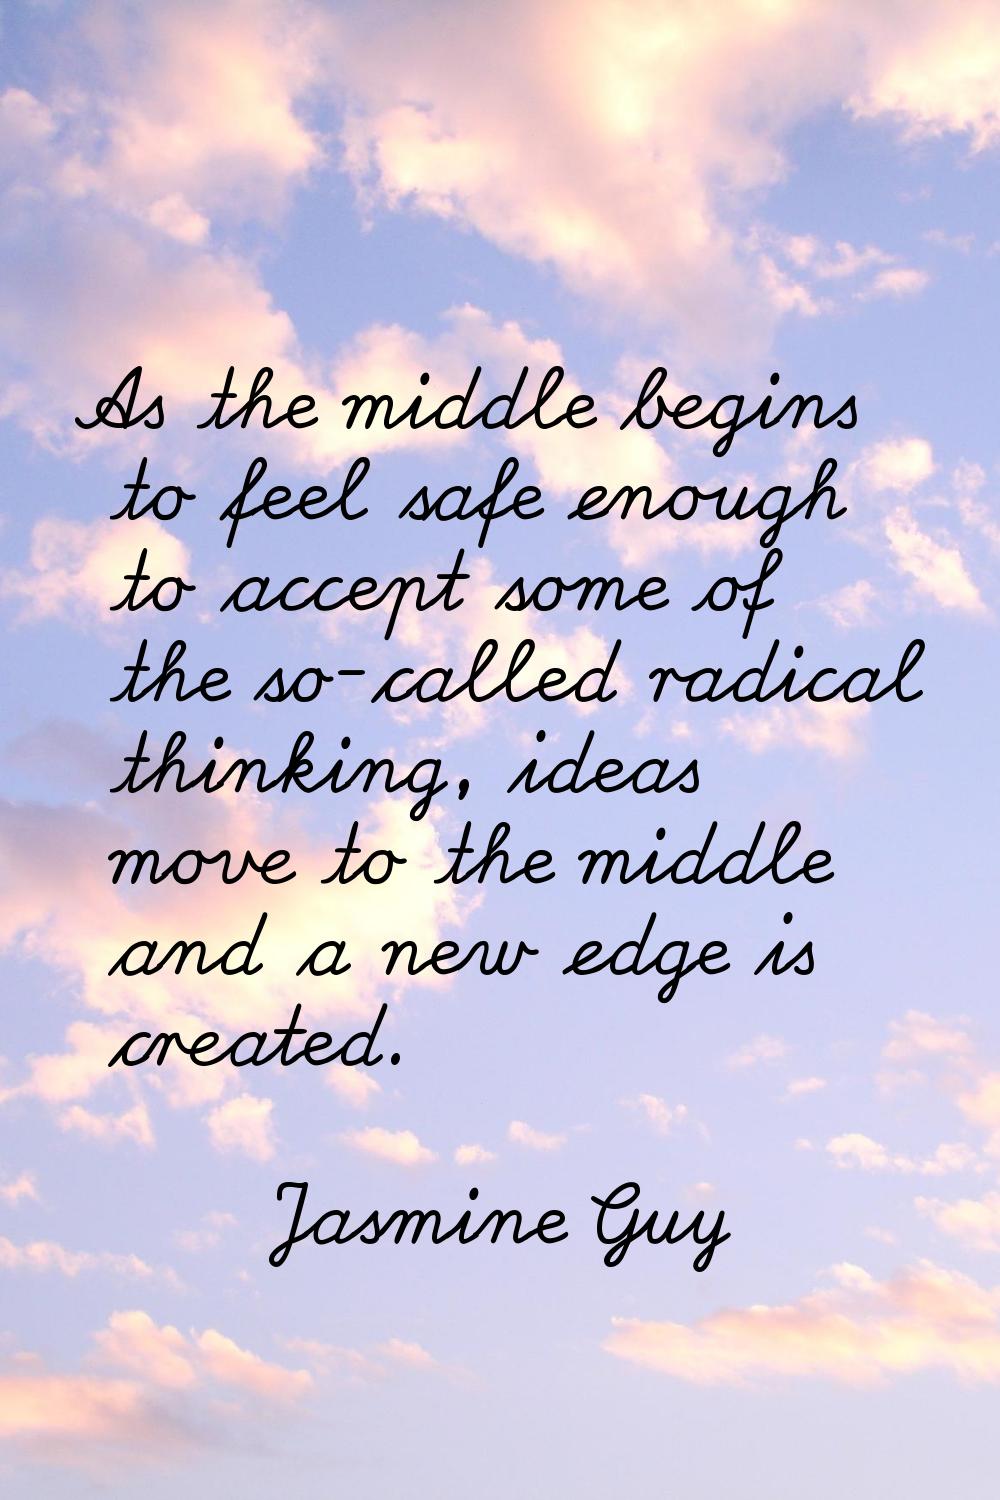 As the middle begins to feel safe enough to accept some of the so-called radical thinking, ideas mo